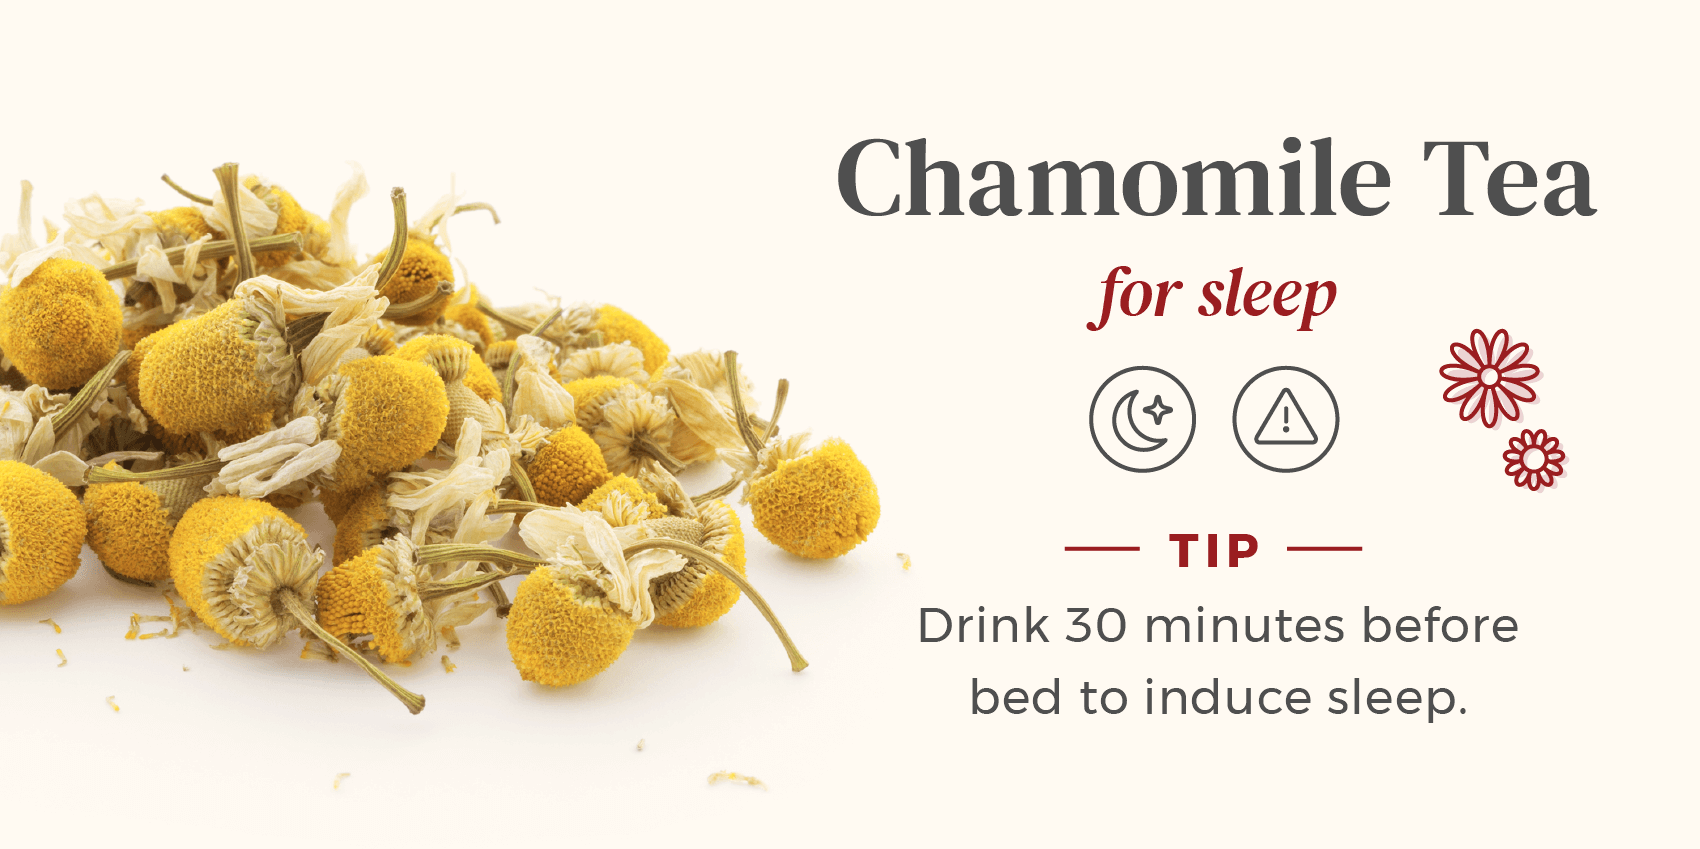 Pile of loose chamomile tea used for sleep, drink 30 mins before bed for best effects.